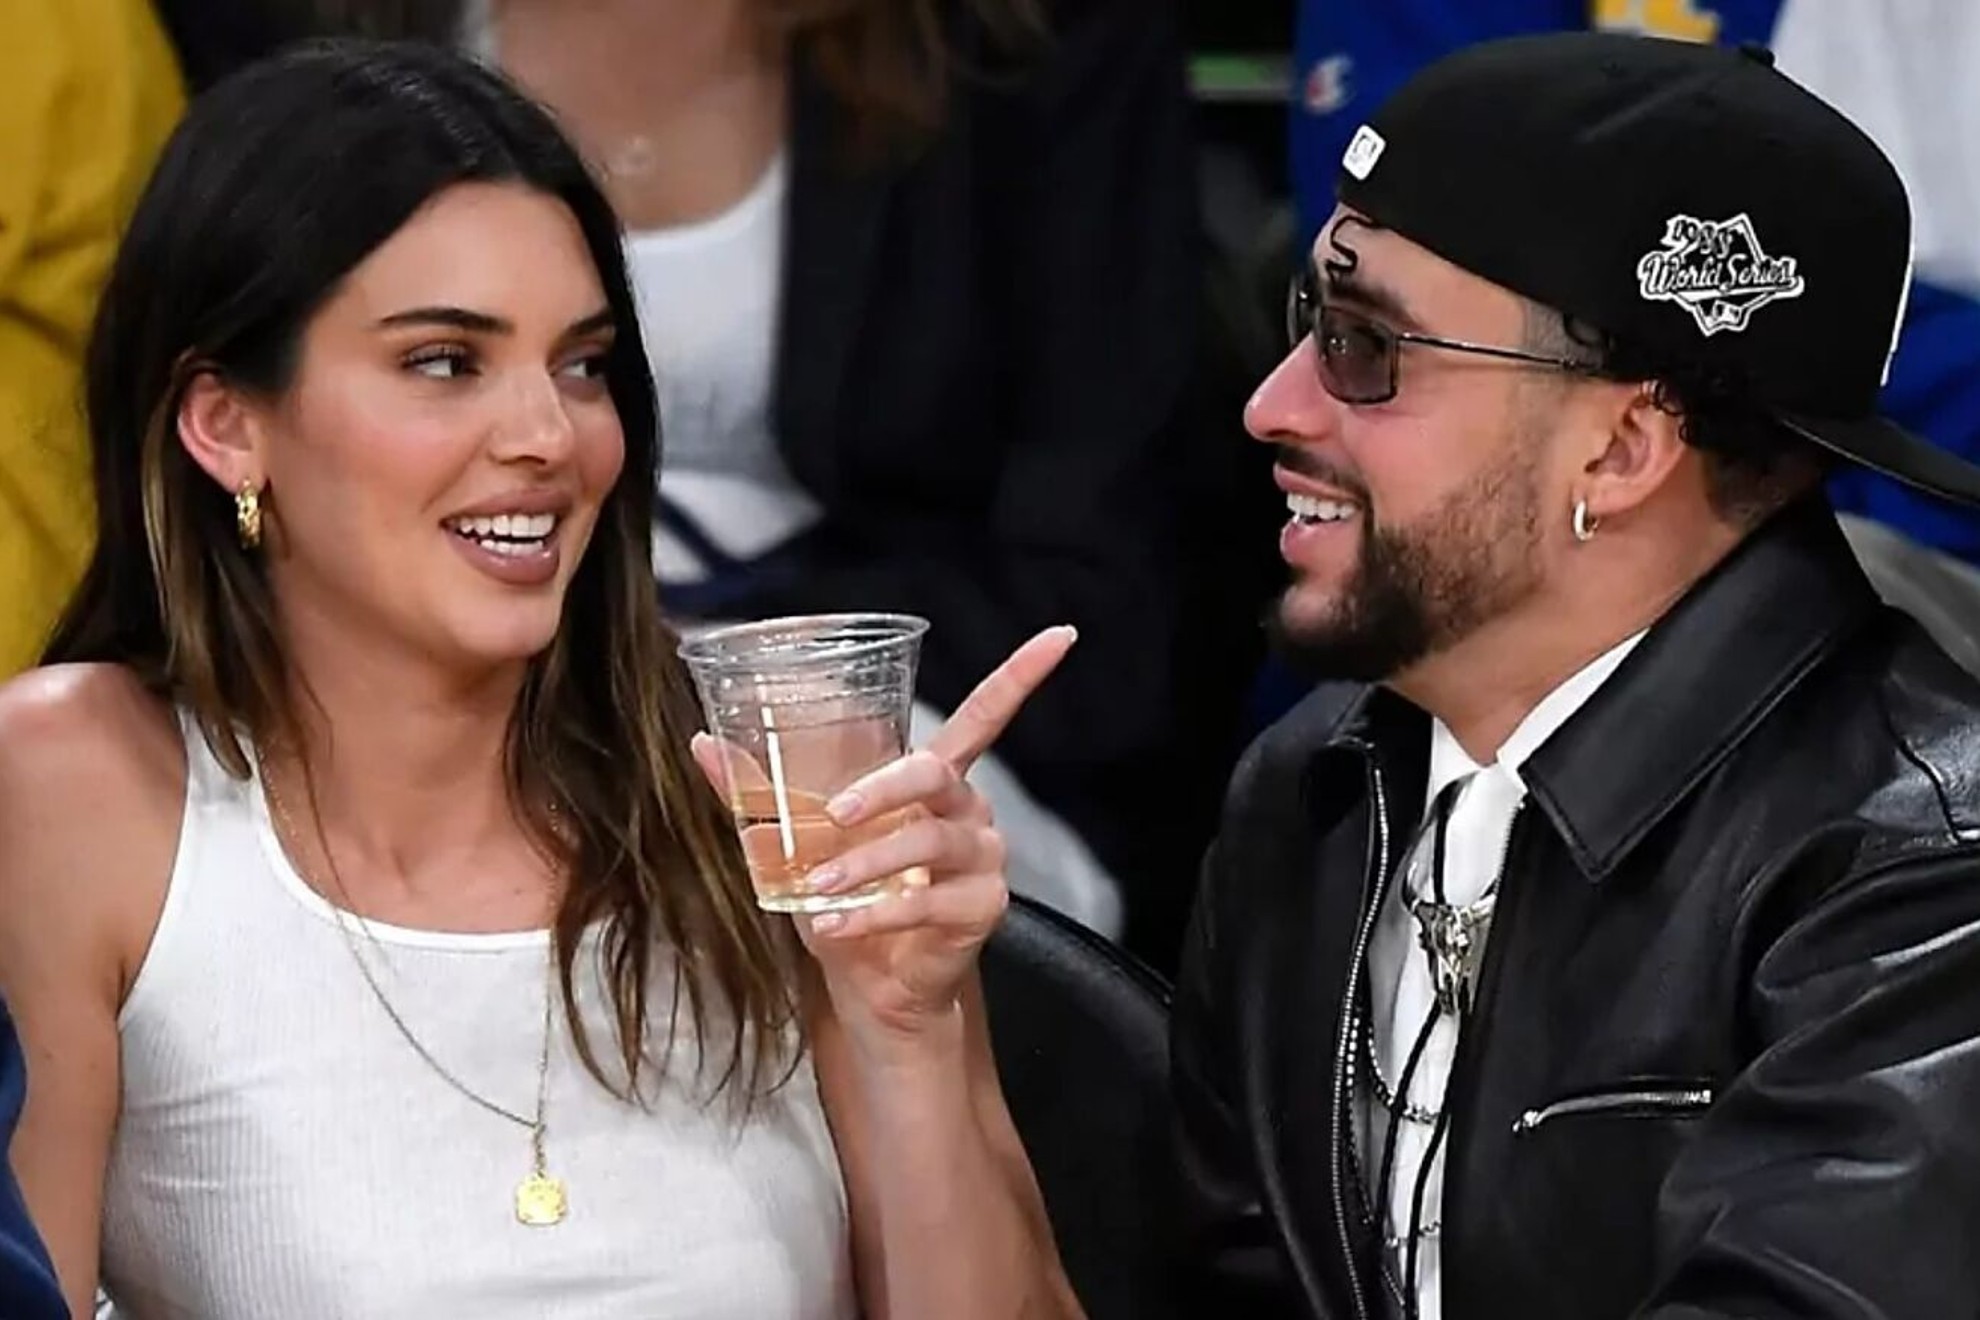 Kendall Jenner and Bad Bunny Love or arrangement? All the past relationships of the couple Marca